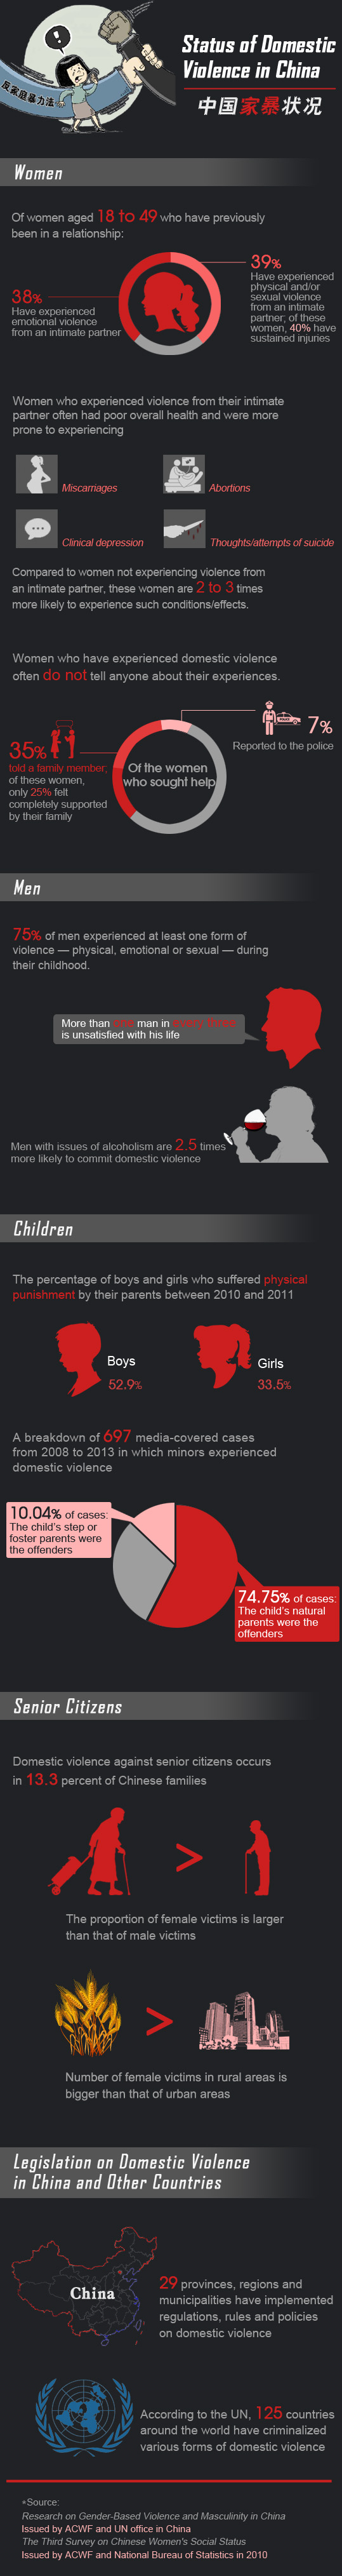 Status of Domestic Violence in China